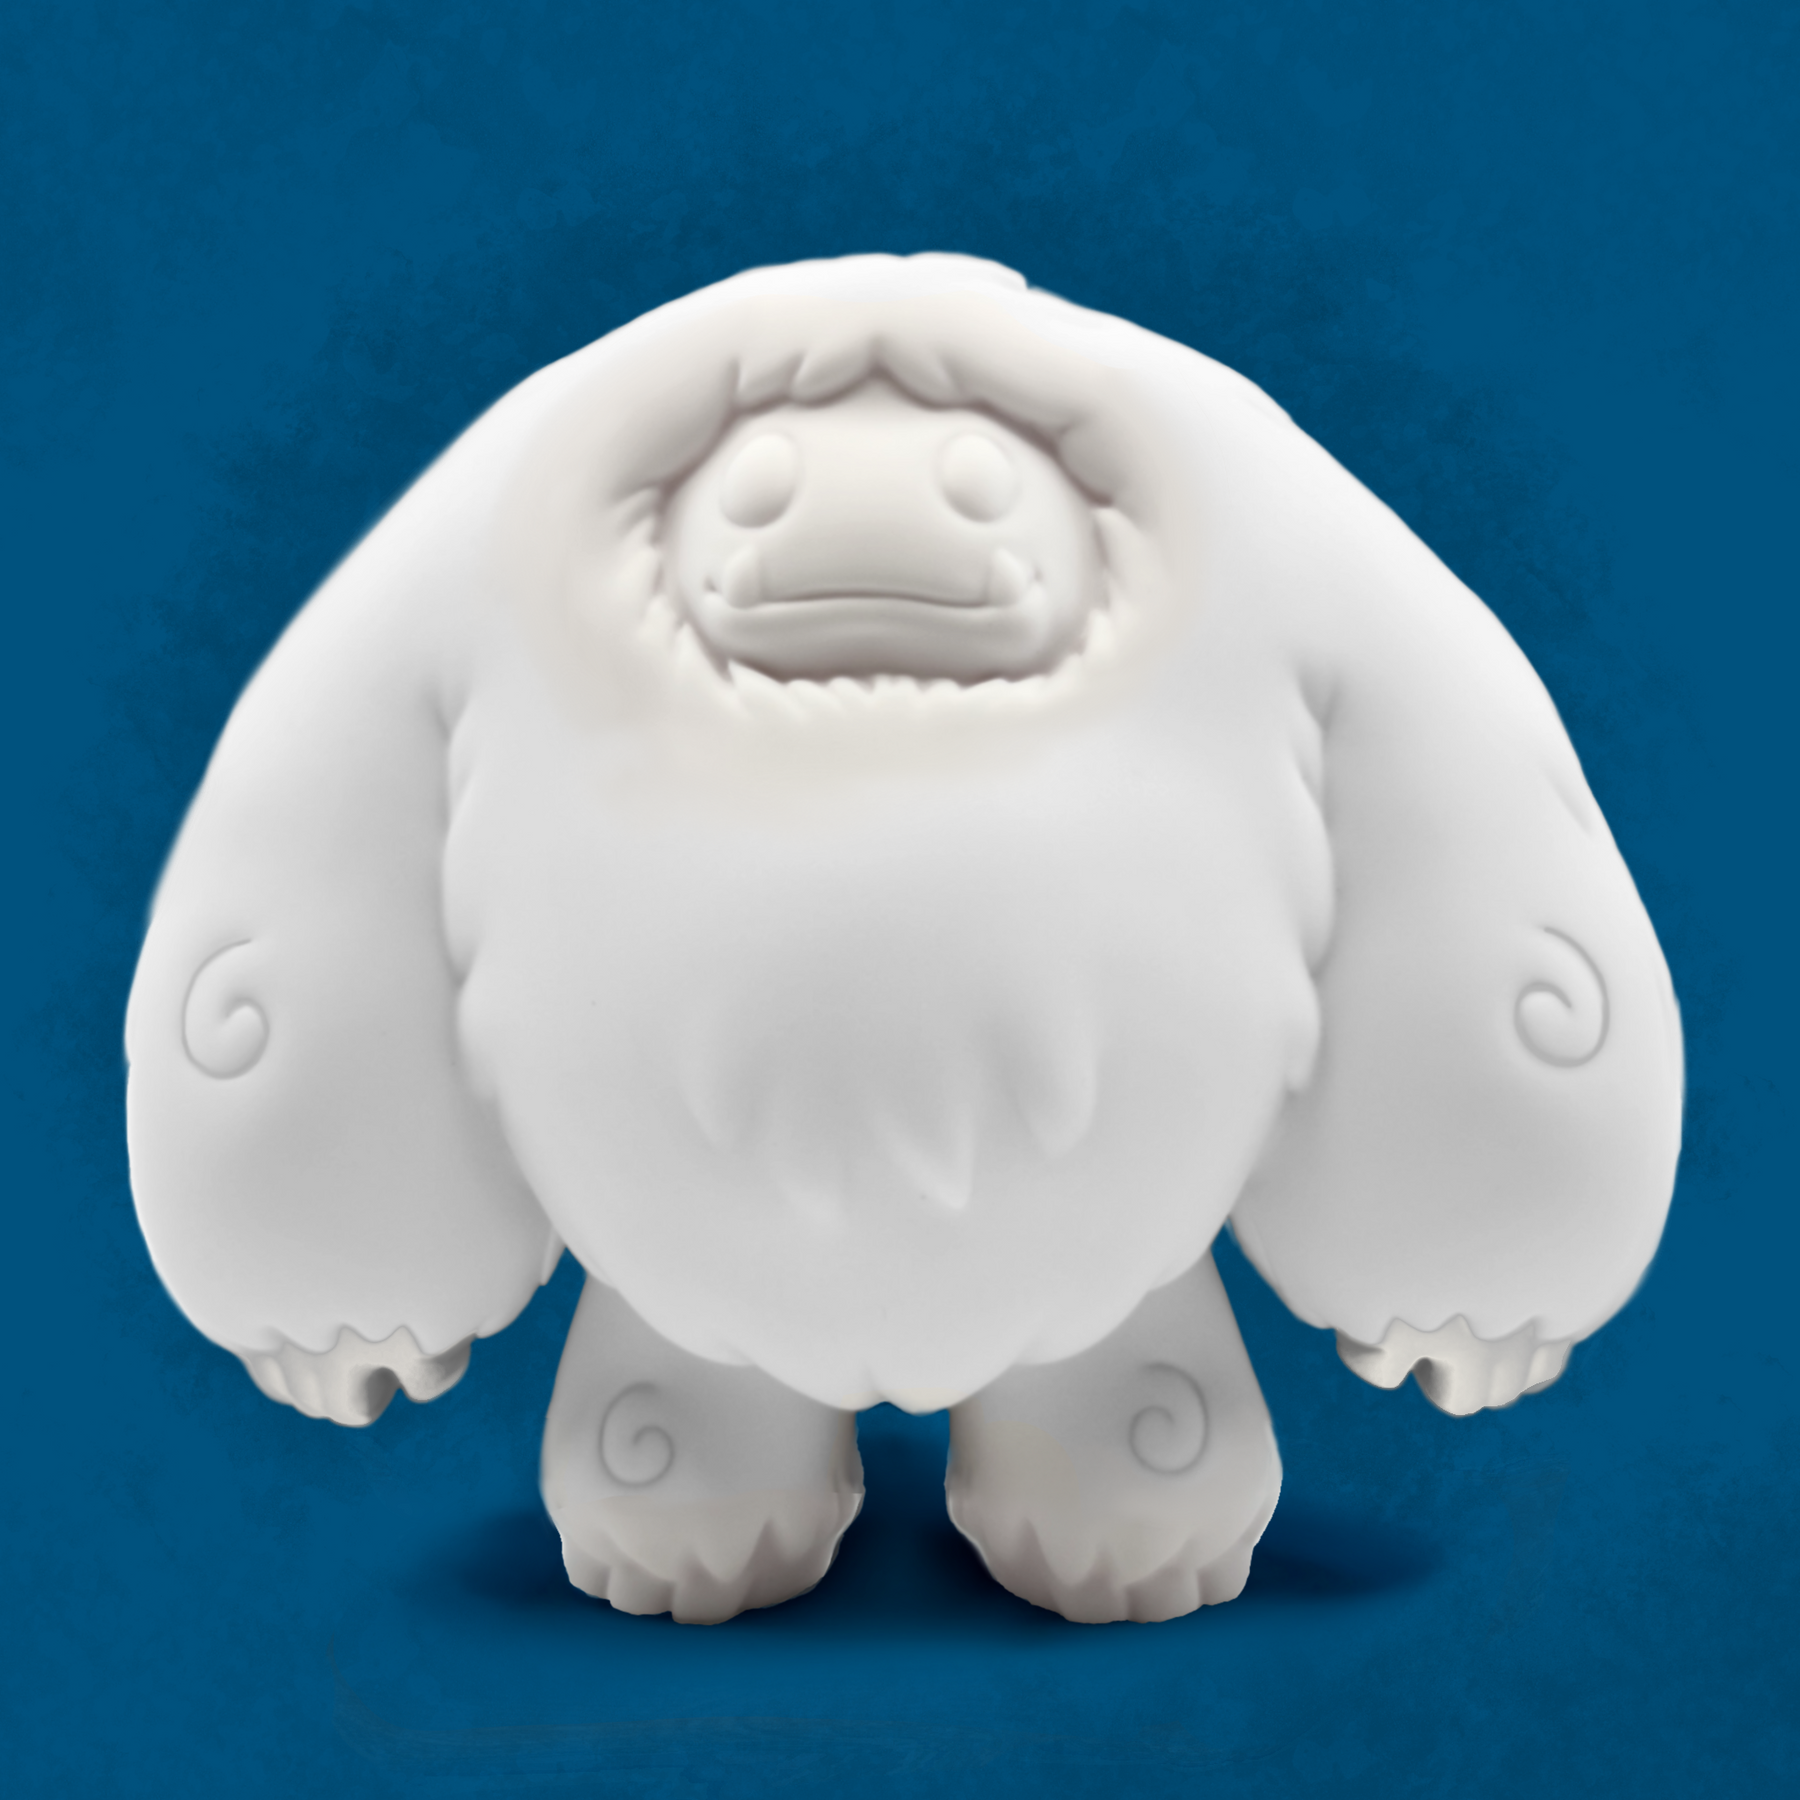 Blank White DIY Chomp 5-inch vinyl figure by Abominable Toys Available Now